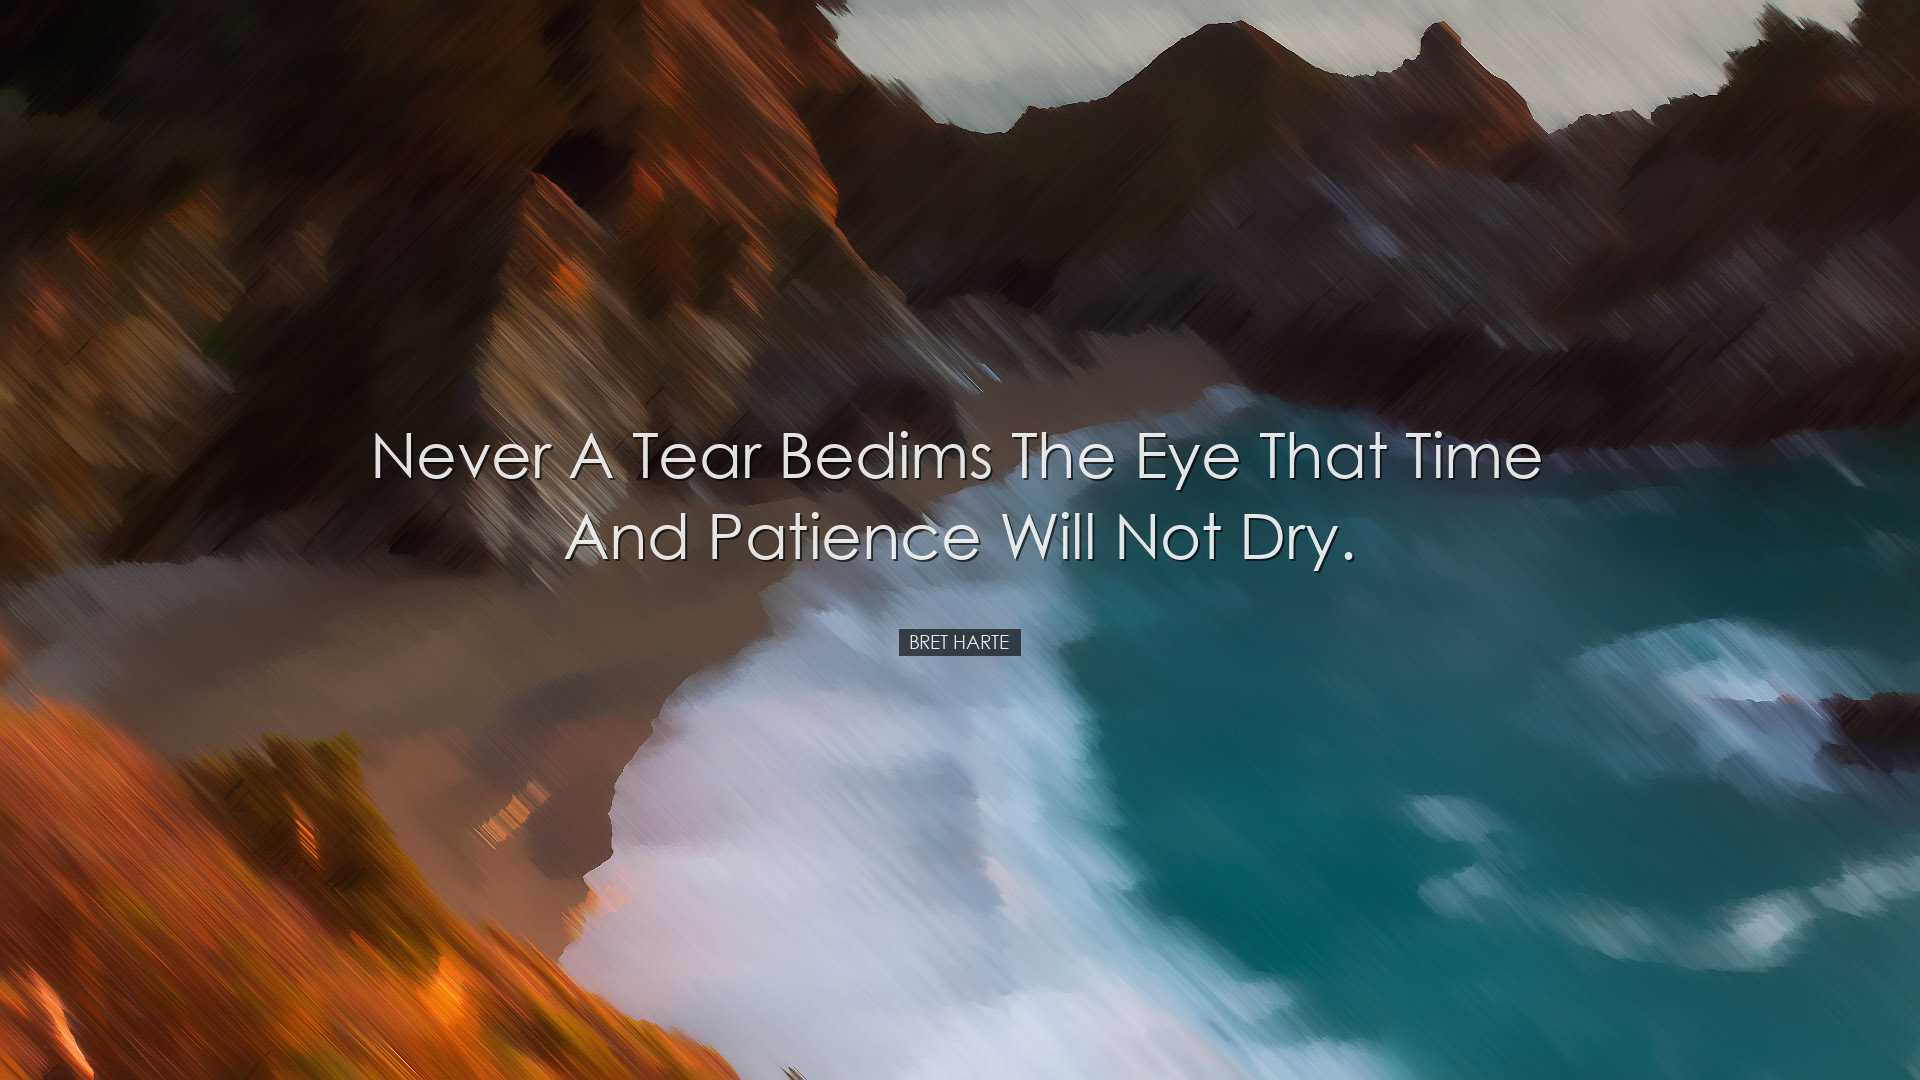 Never a tear bedims the eye that time and patience will not dry. -